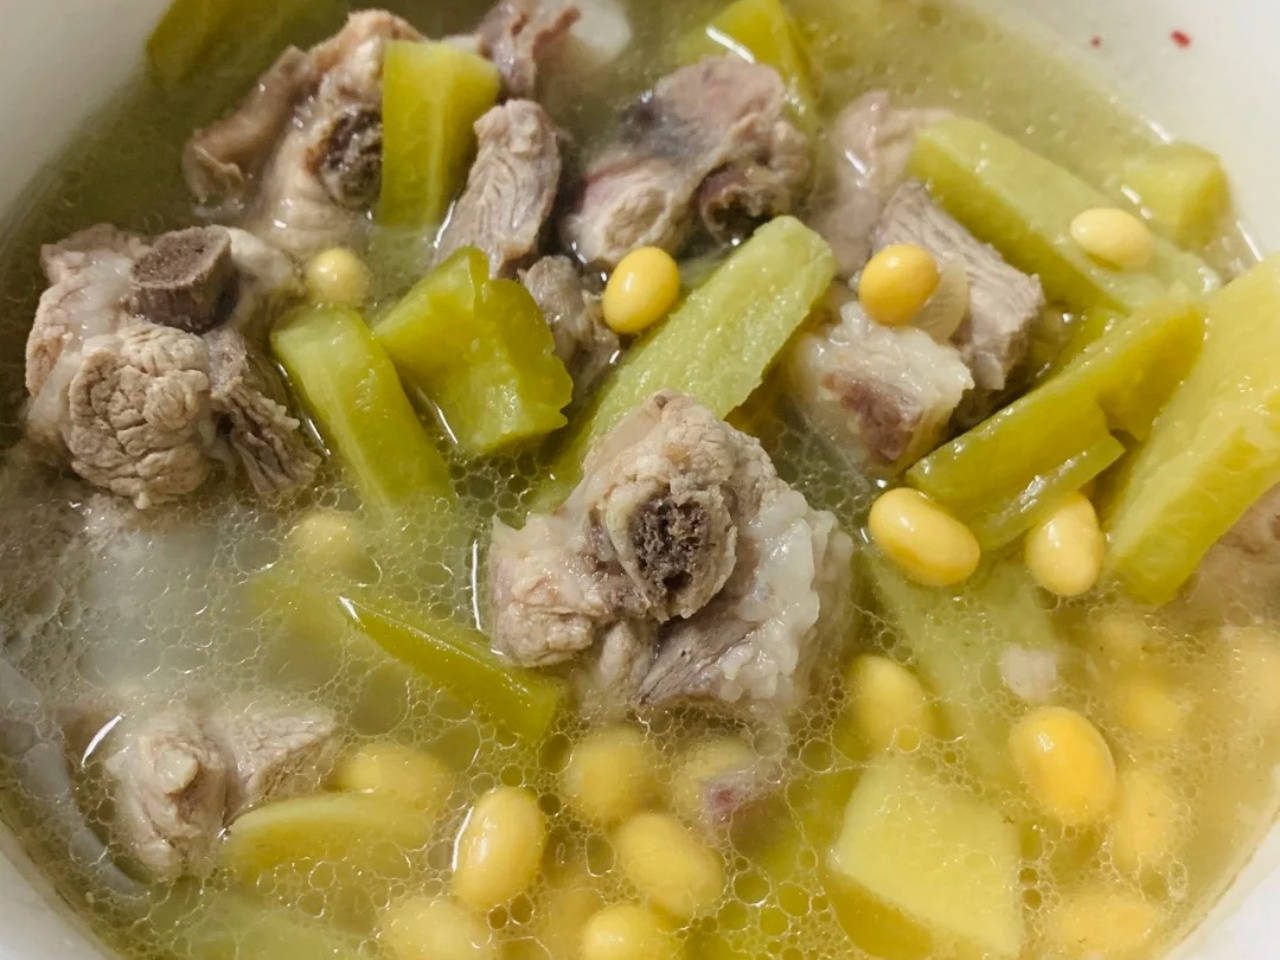 Who can drink bitter melon and spare rib soup?